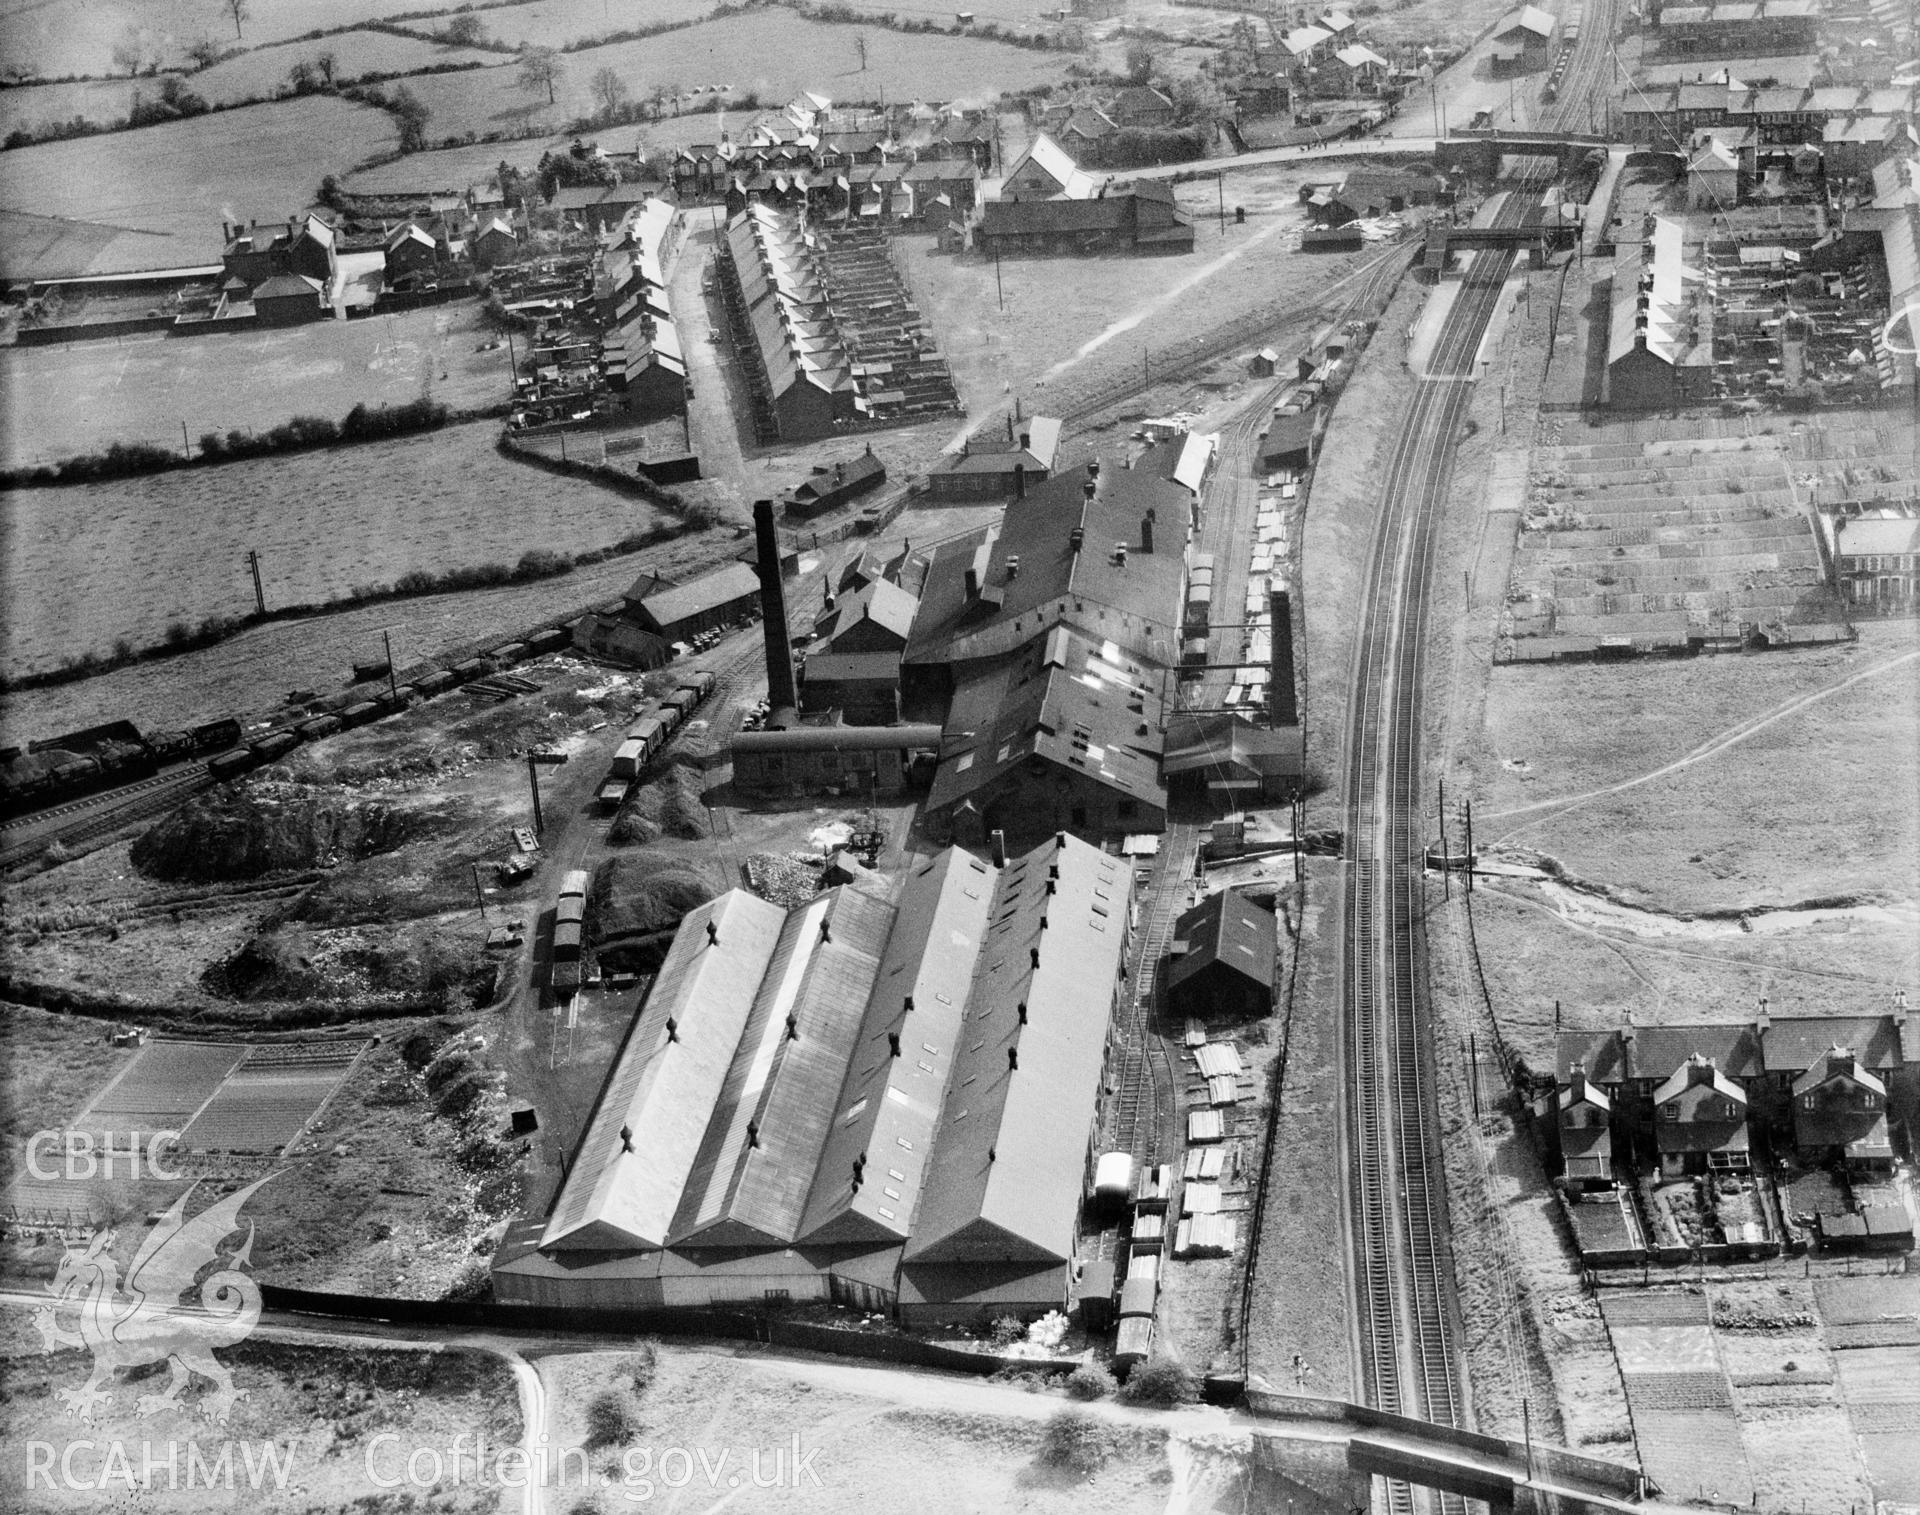 View of Redbrook Tinplate Co., Pontnewydd, oblique aerial view. 5?x4? black and white glass plate negative.